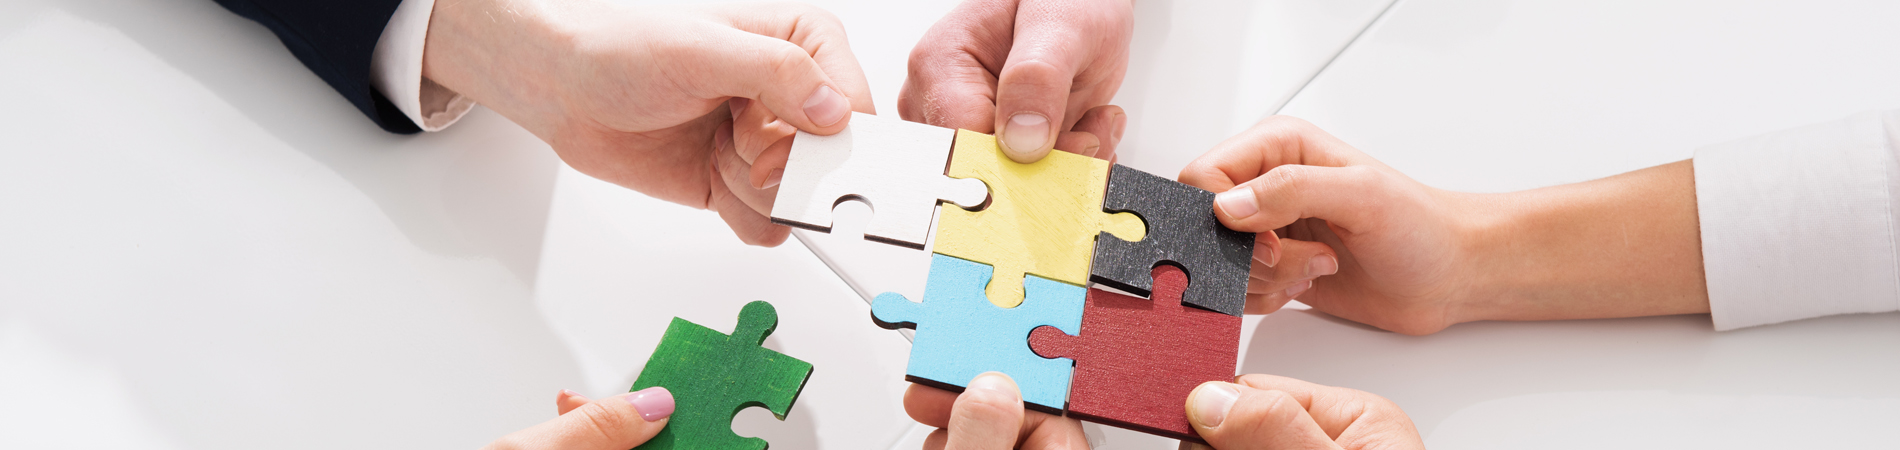 puzzle pieces coming together to represent how ehr mergers work